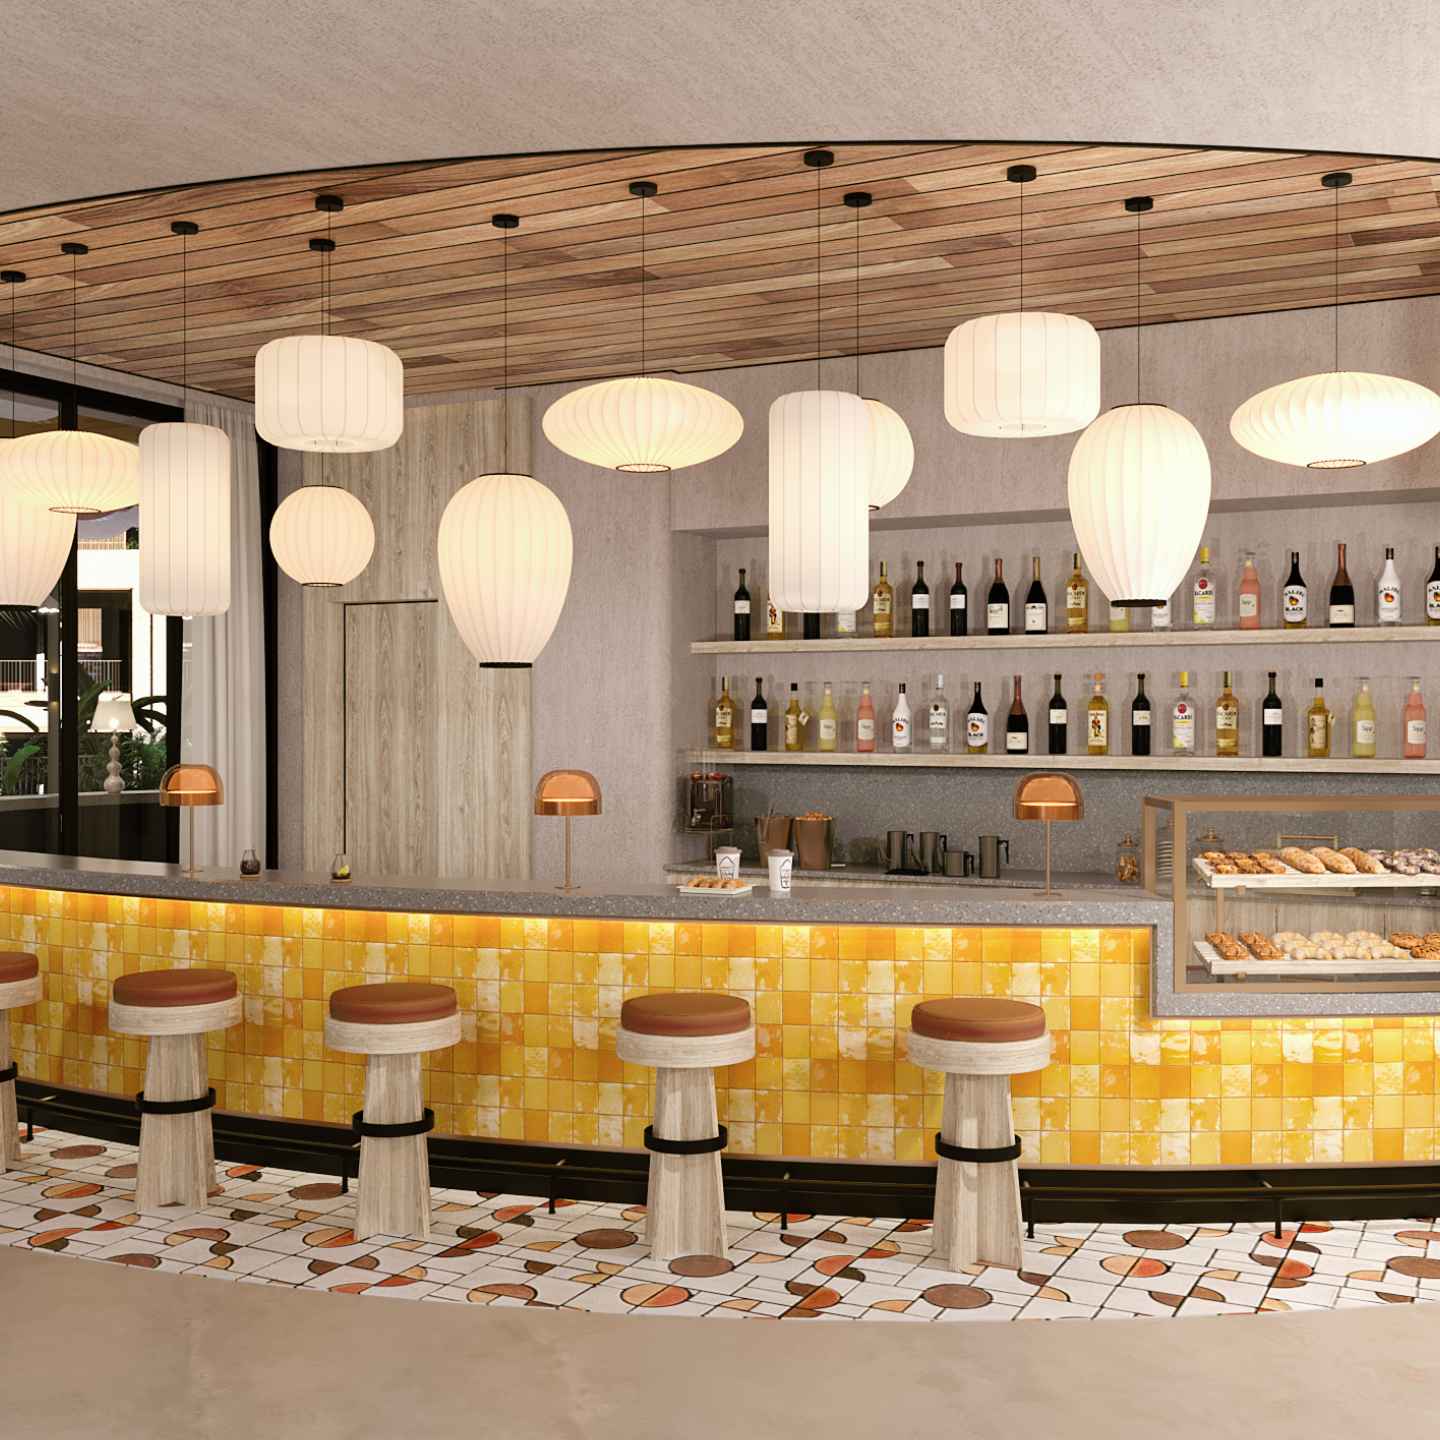 Bar with yellow tile, various shaped hanging lights, round barstools, and pastry case